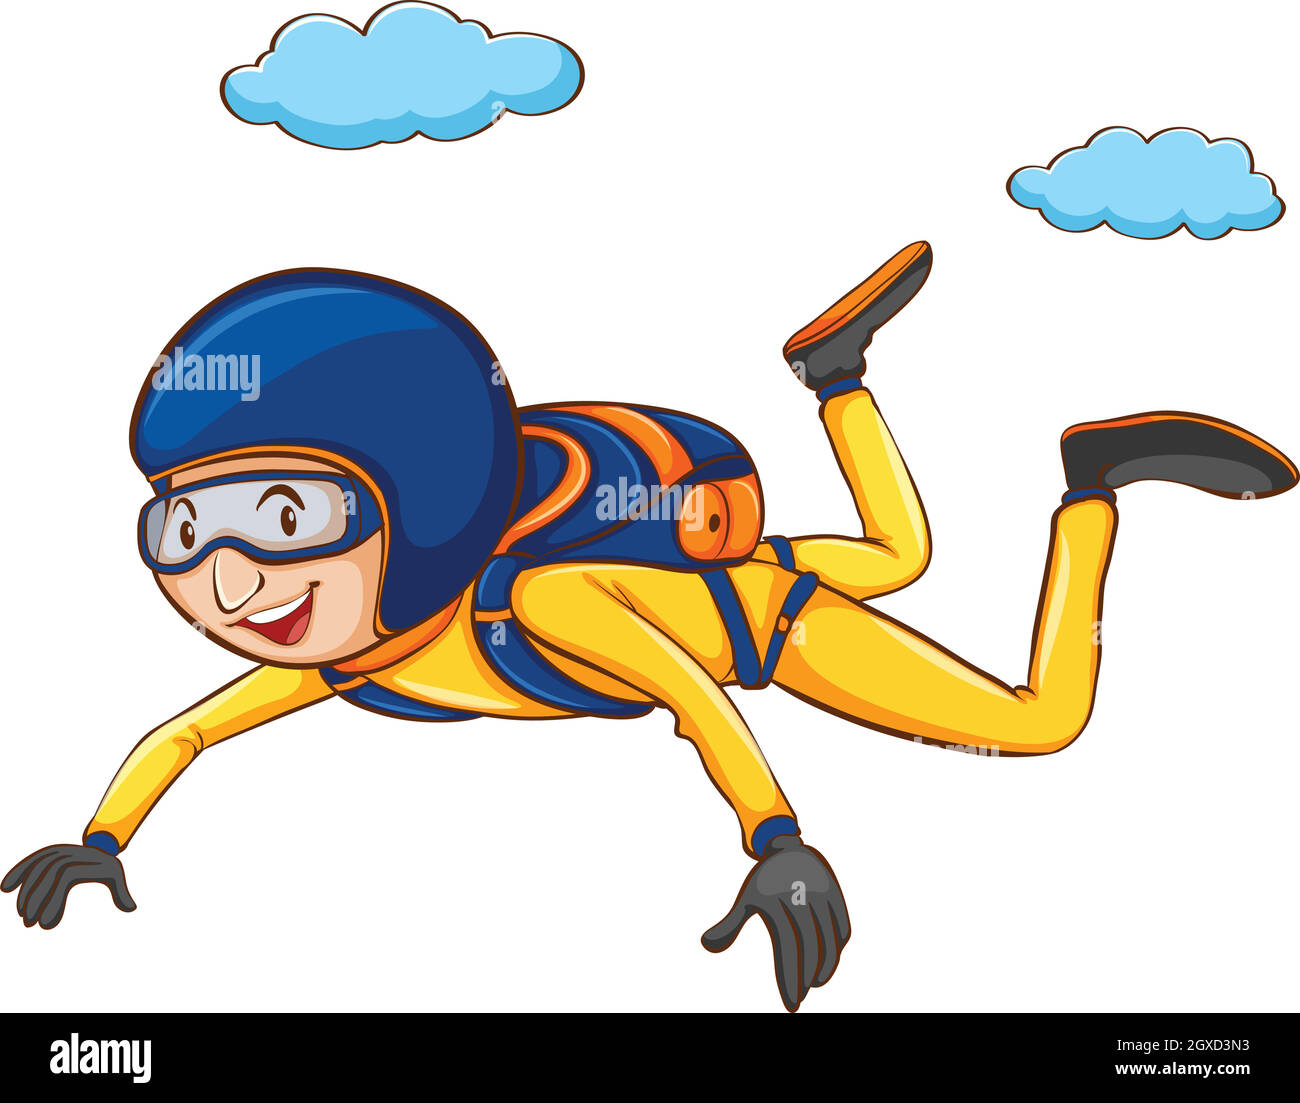 A simple sketch of a man sky diving Stock Vector